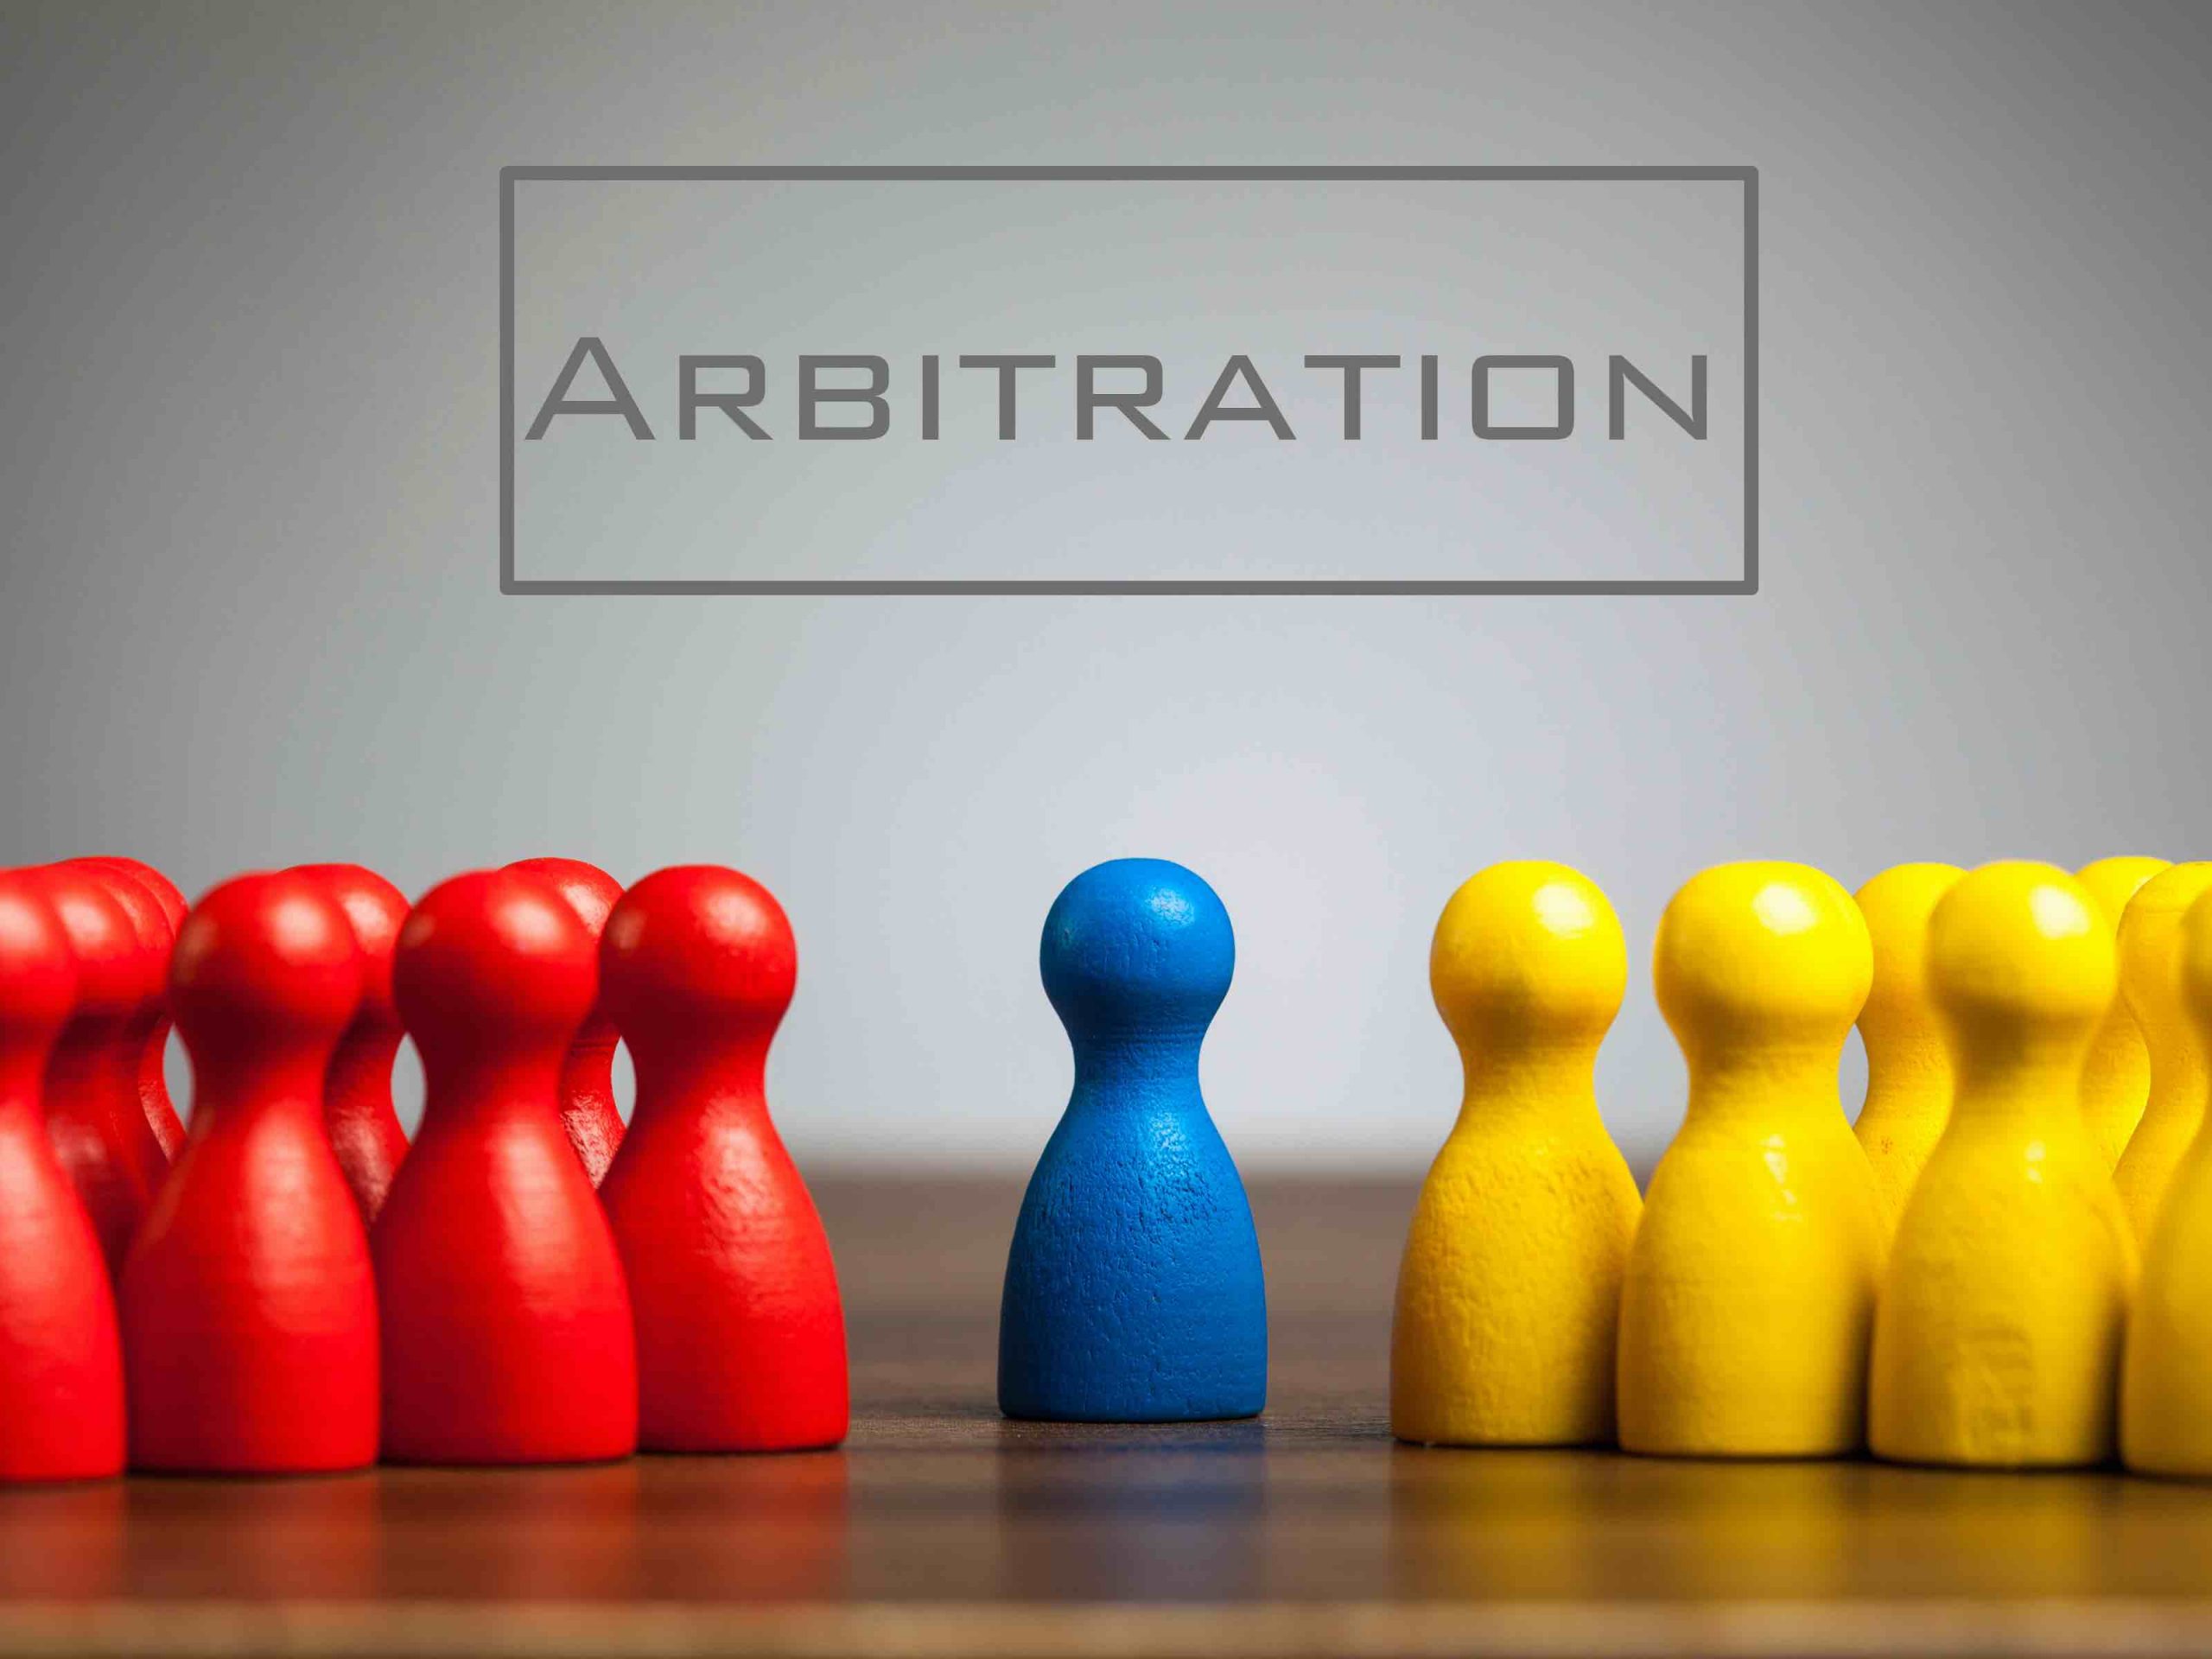 Why go to arbitration